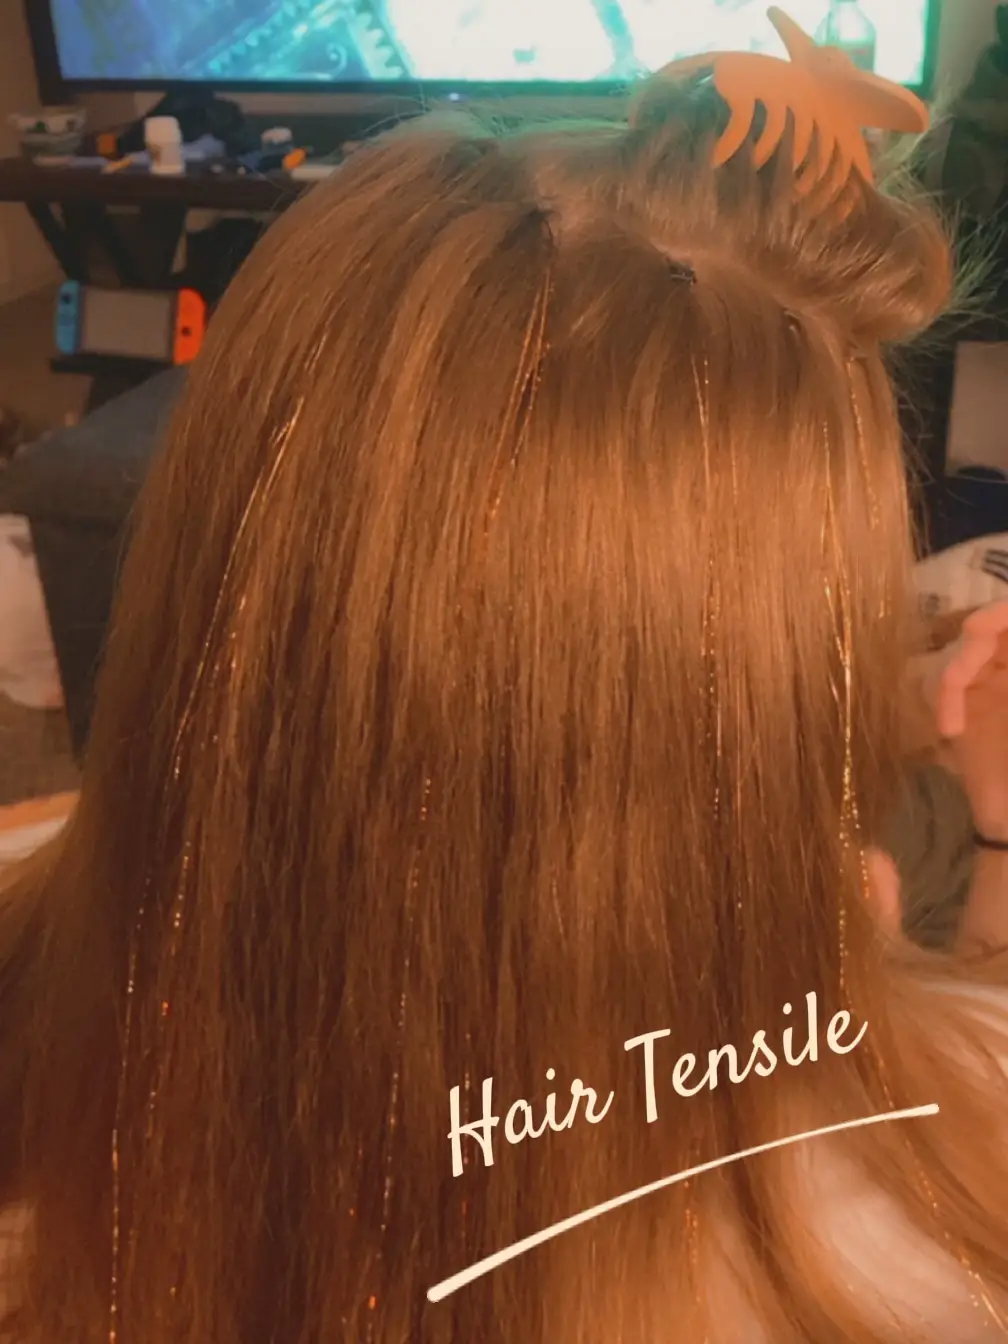 Hair Tensile, Gallery posted by Audisox